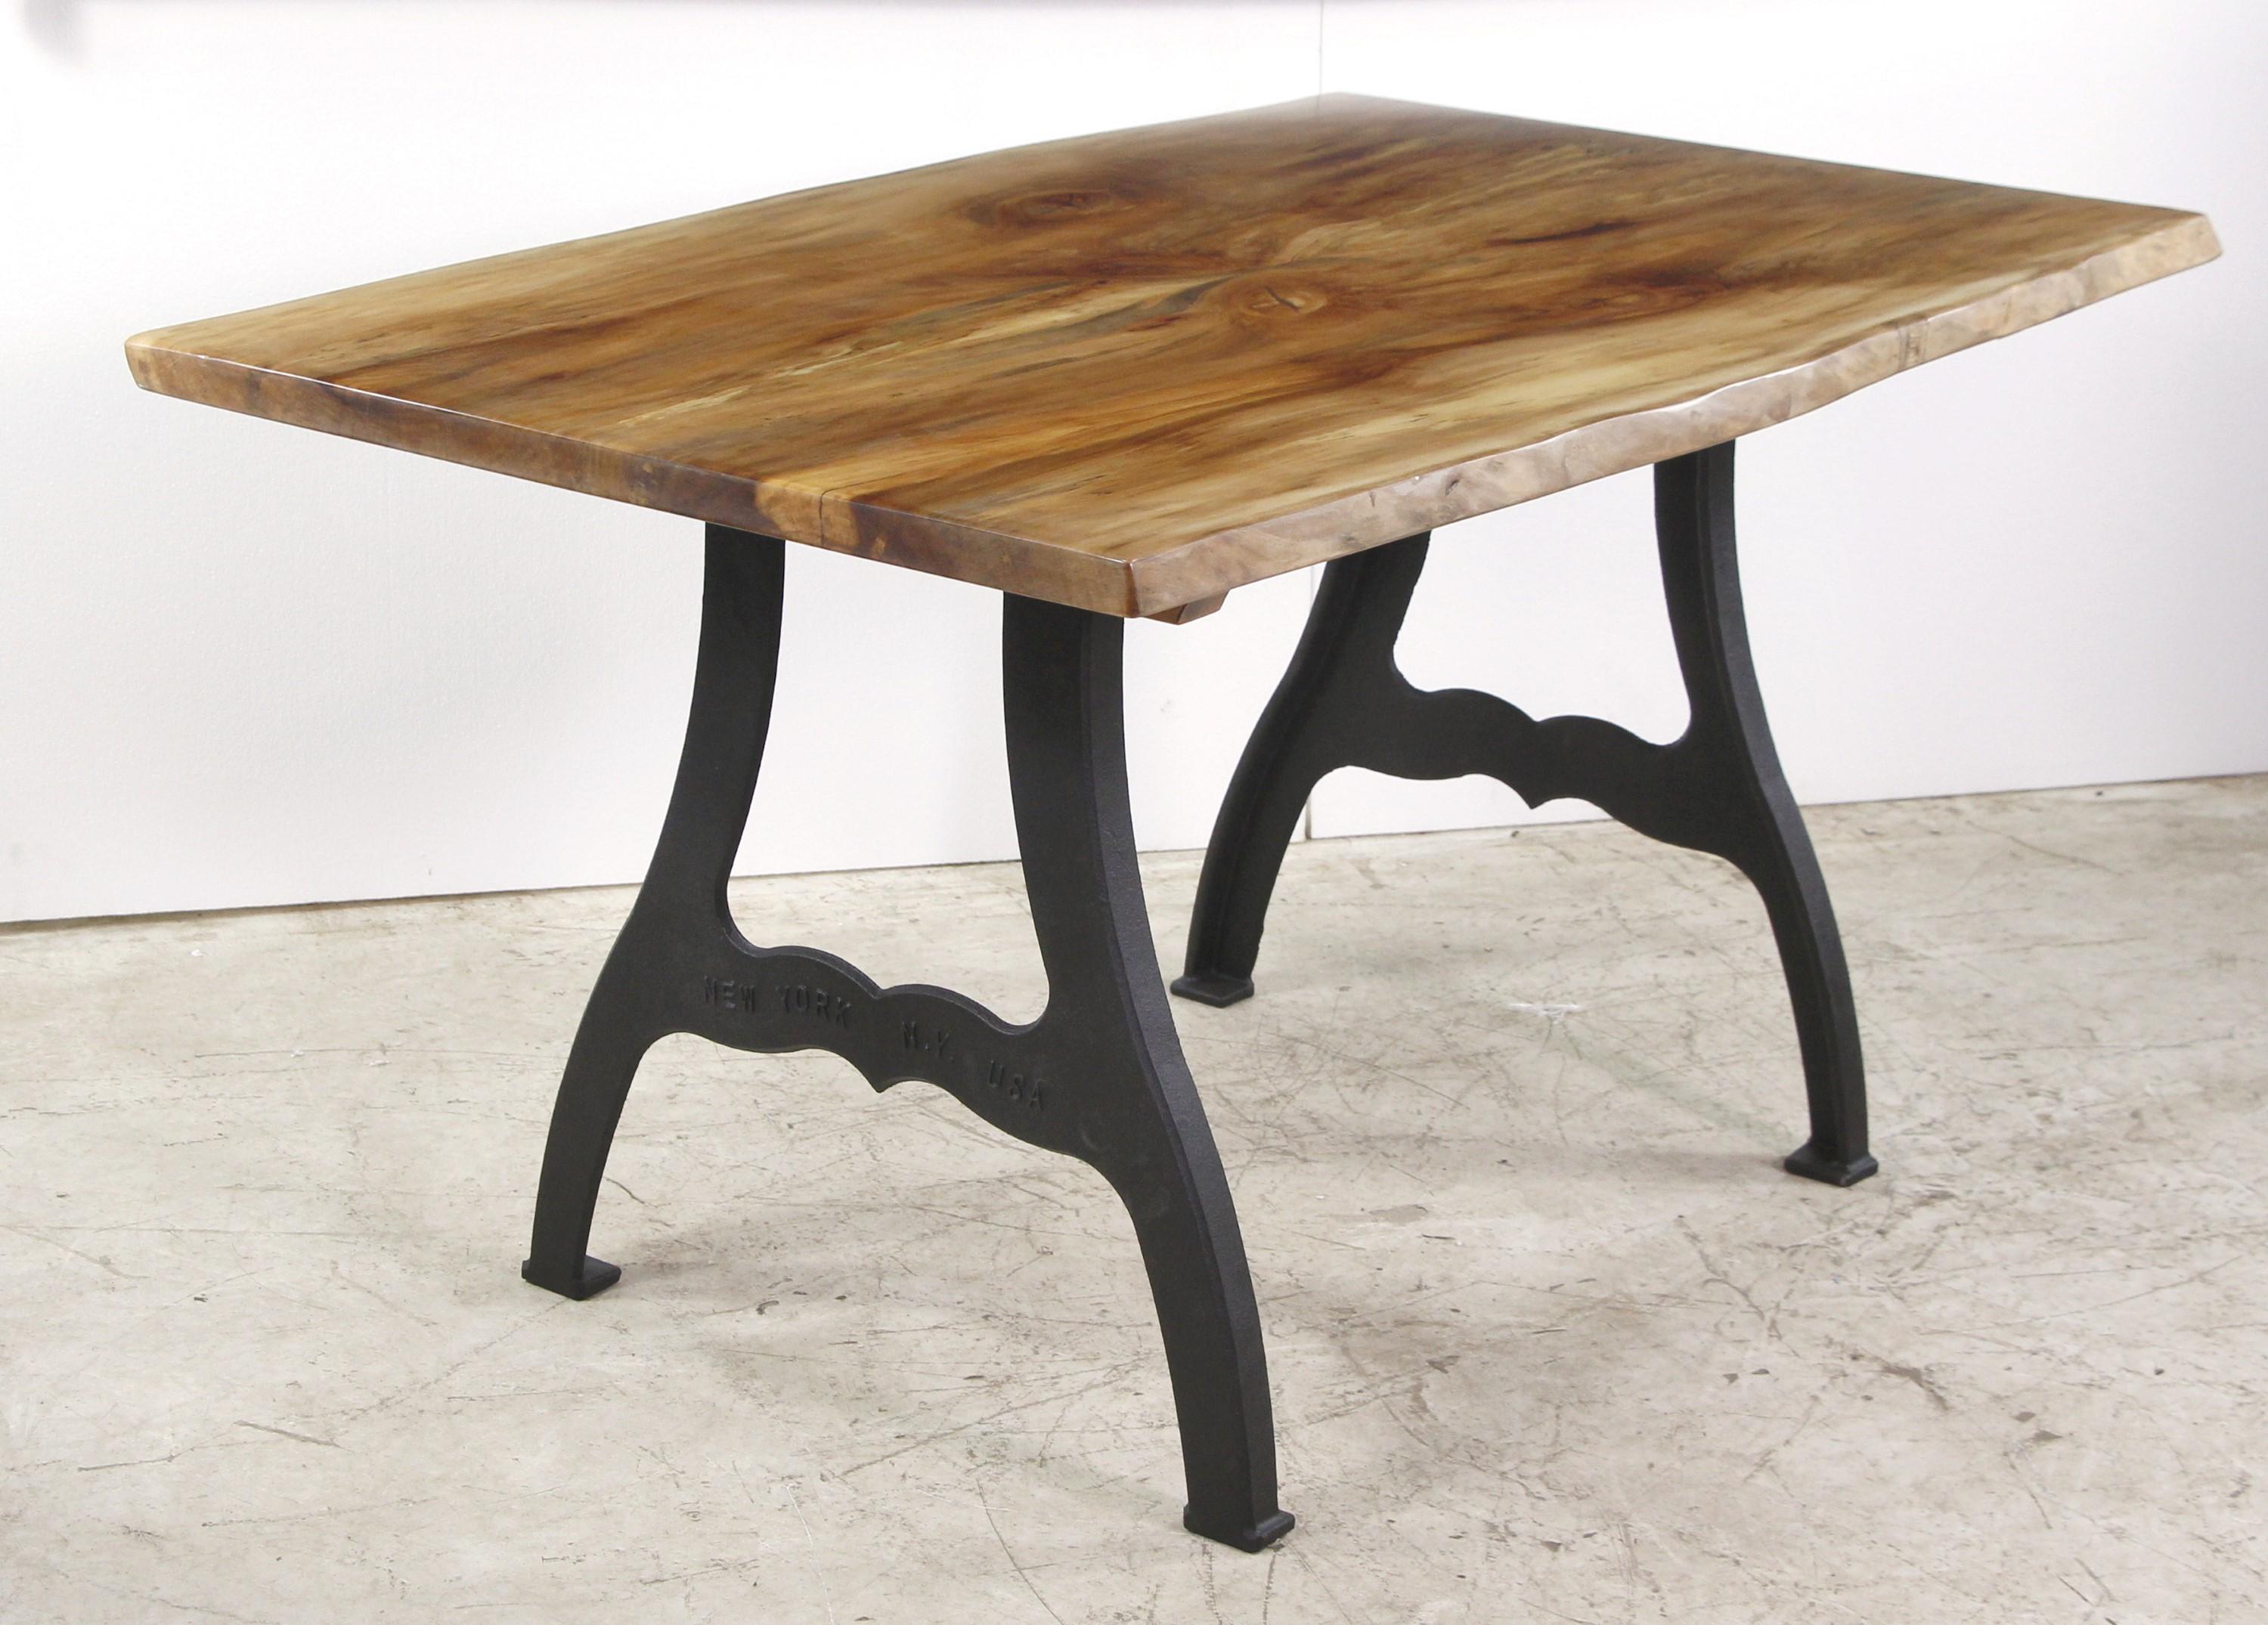 Newly made live edge maple table top featuring 2 slab construction giving an open book matched look and an Organic Modern feel. Paired with Industrial cast iron legs that say New York, NY embossed on them. This can be seen at our 400 Gilligan St